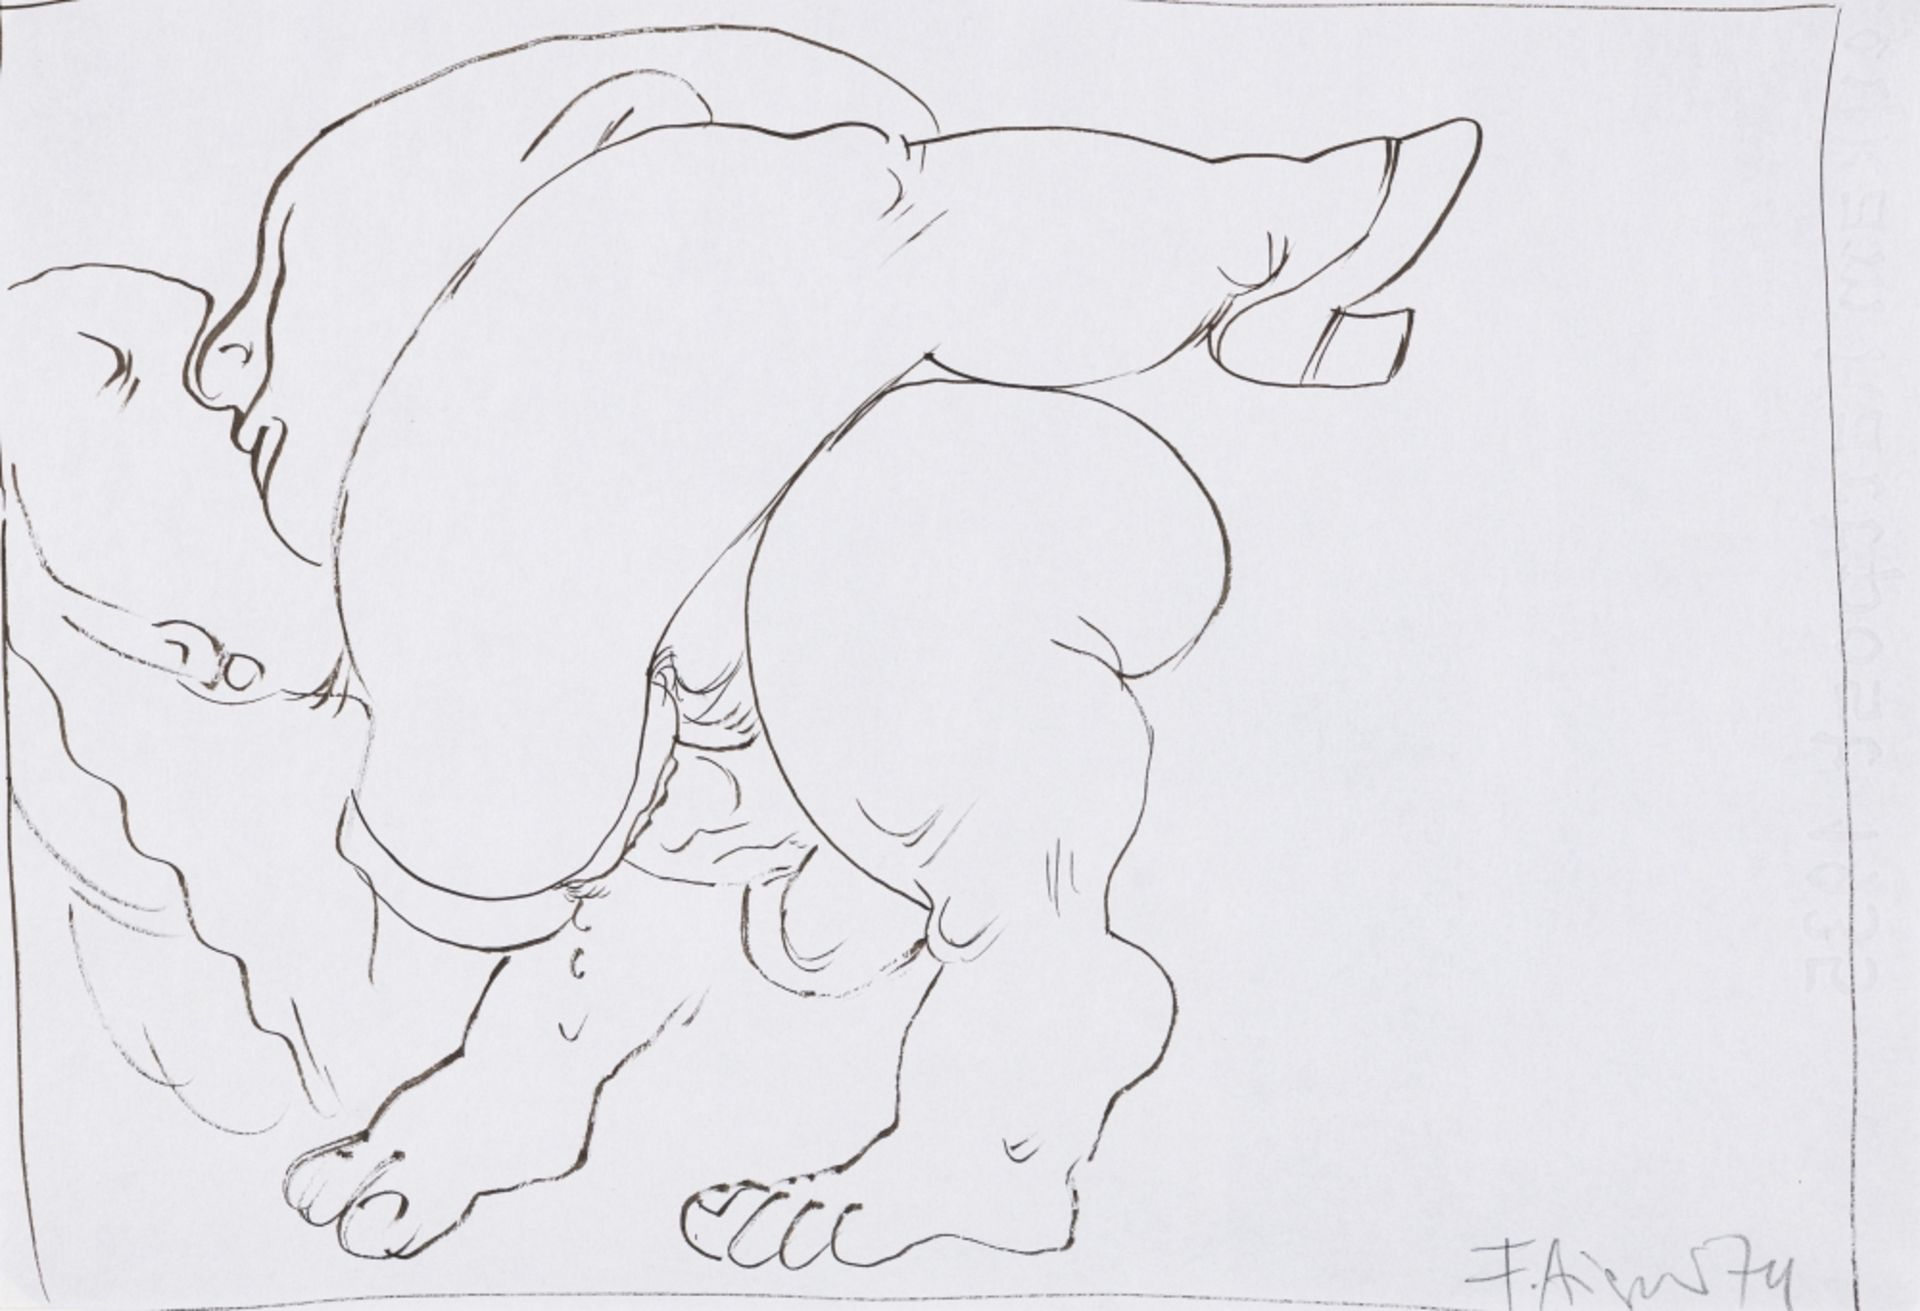 Aigner, Fritz (1930 - 2005) Untitled Ink Brush Drawing Signed lower right Sheet Size: 8 x 11,7 in